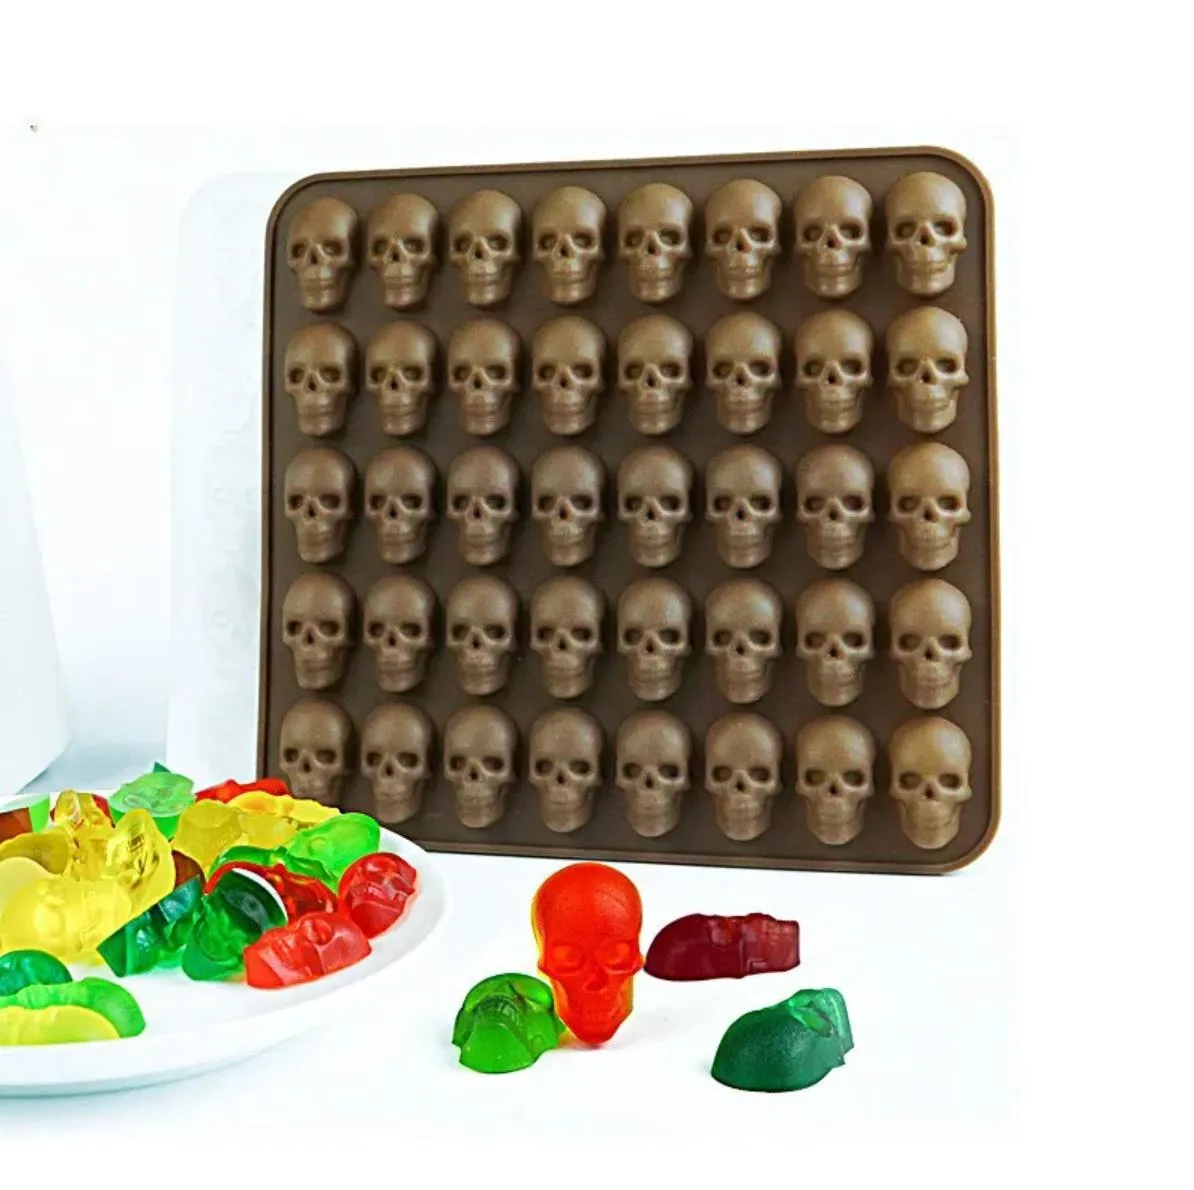 DHL Halloween Baking Moulds Skull Candy Mold Silicone Skull Shape Gummy Chocolate Candies Jelly Mould Wholesale